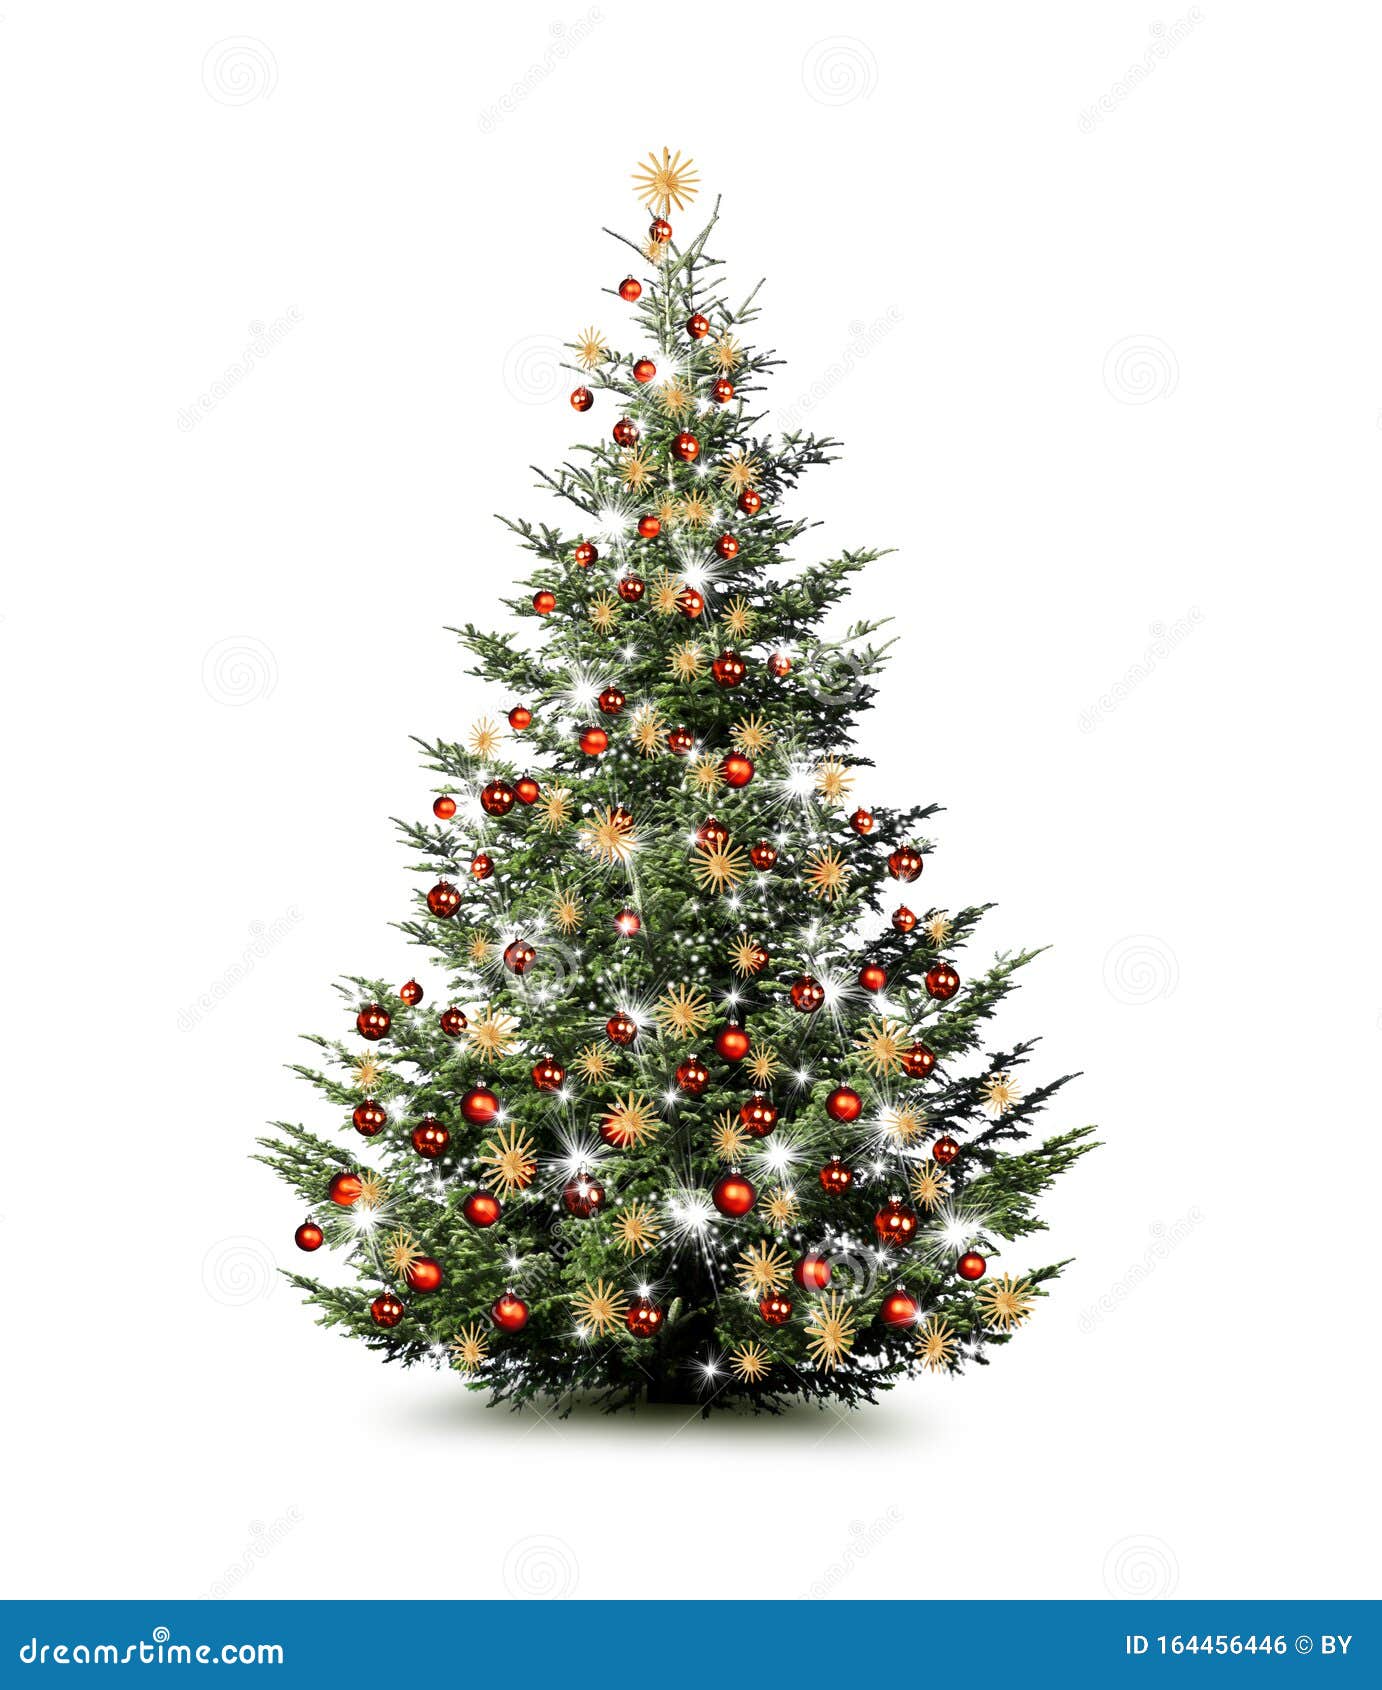 brightly decorated christmas tree  on white background